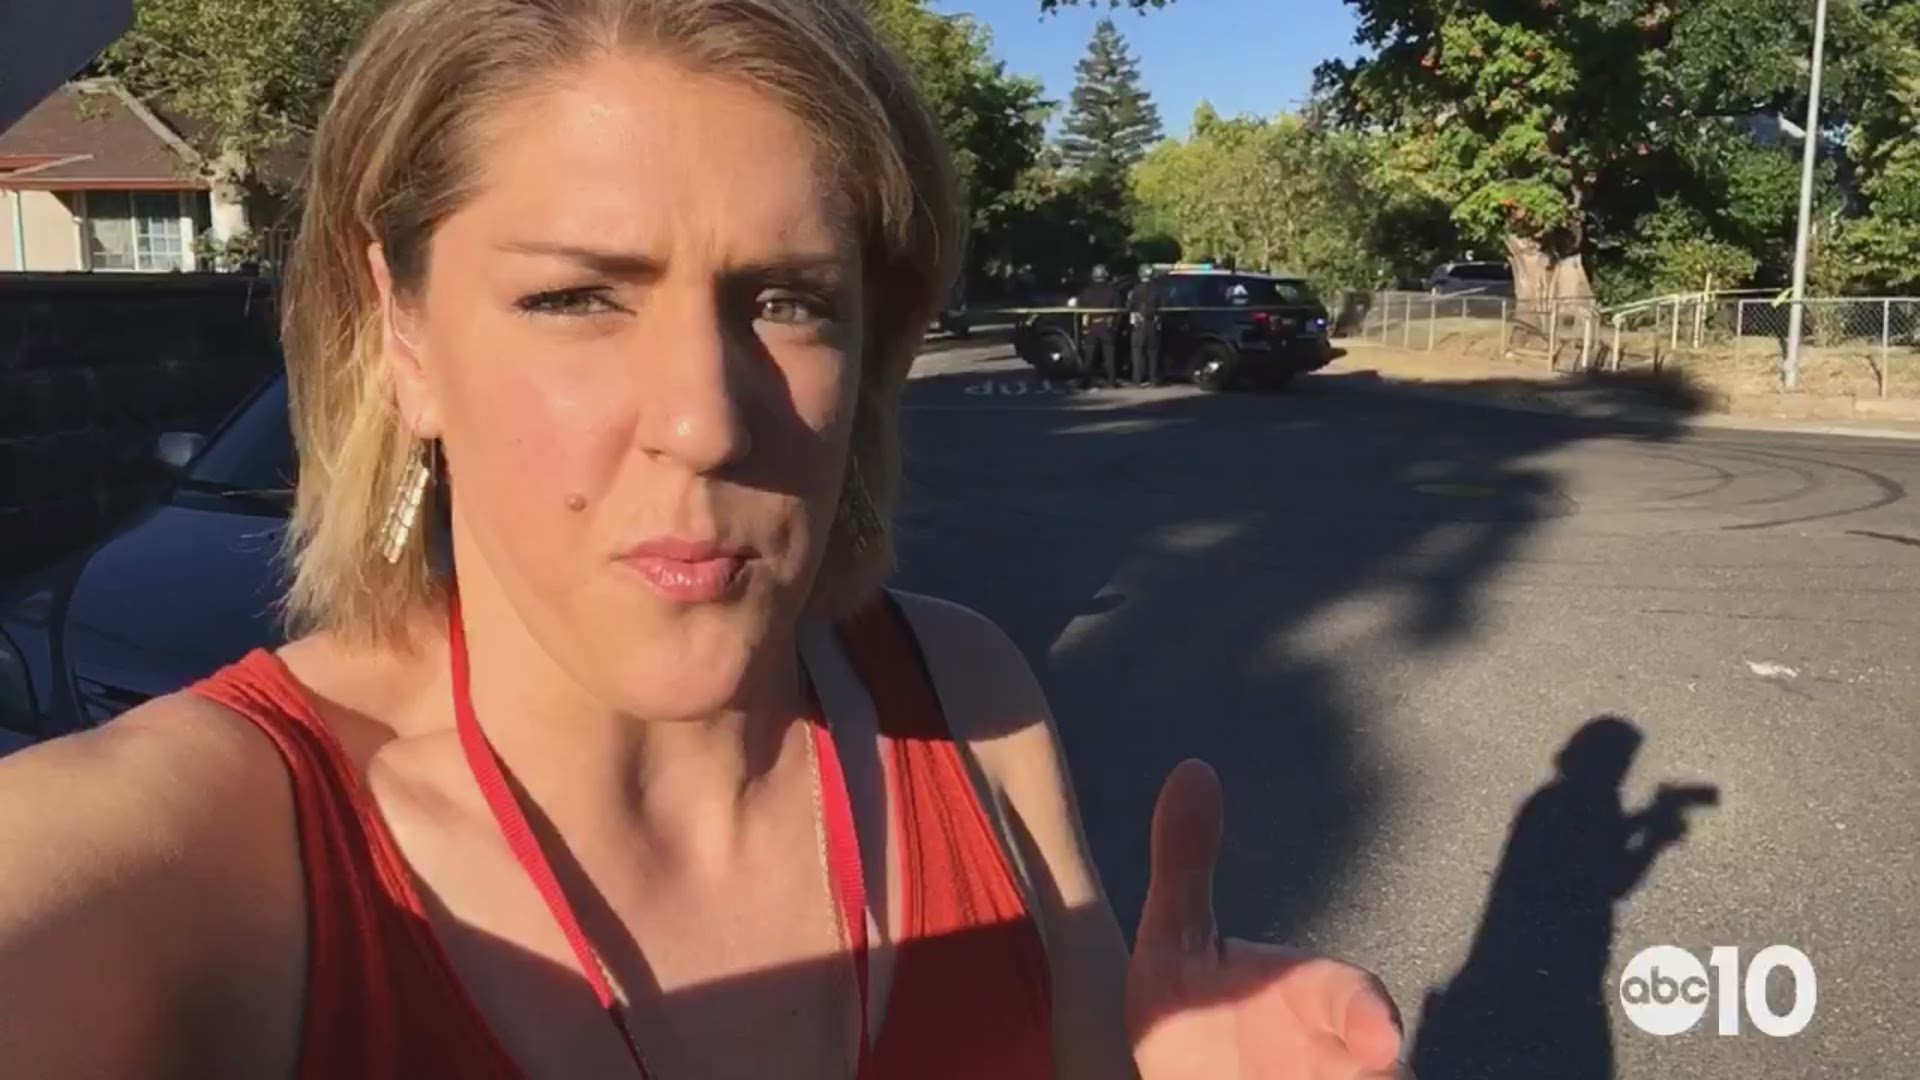 Sacramento gunman update: Becca Habegger has an update on the North Sacramento shooter from her location at Colfax & Redwood Ave.